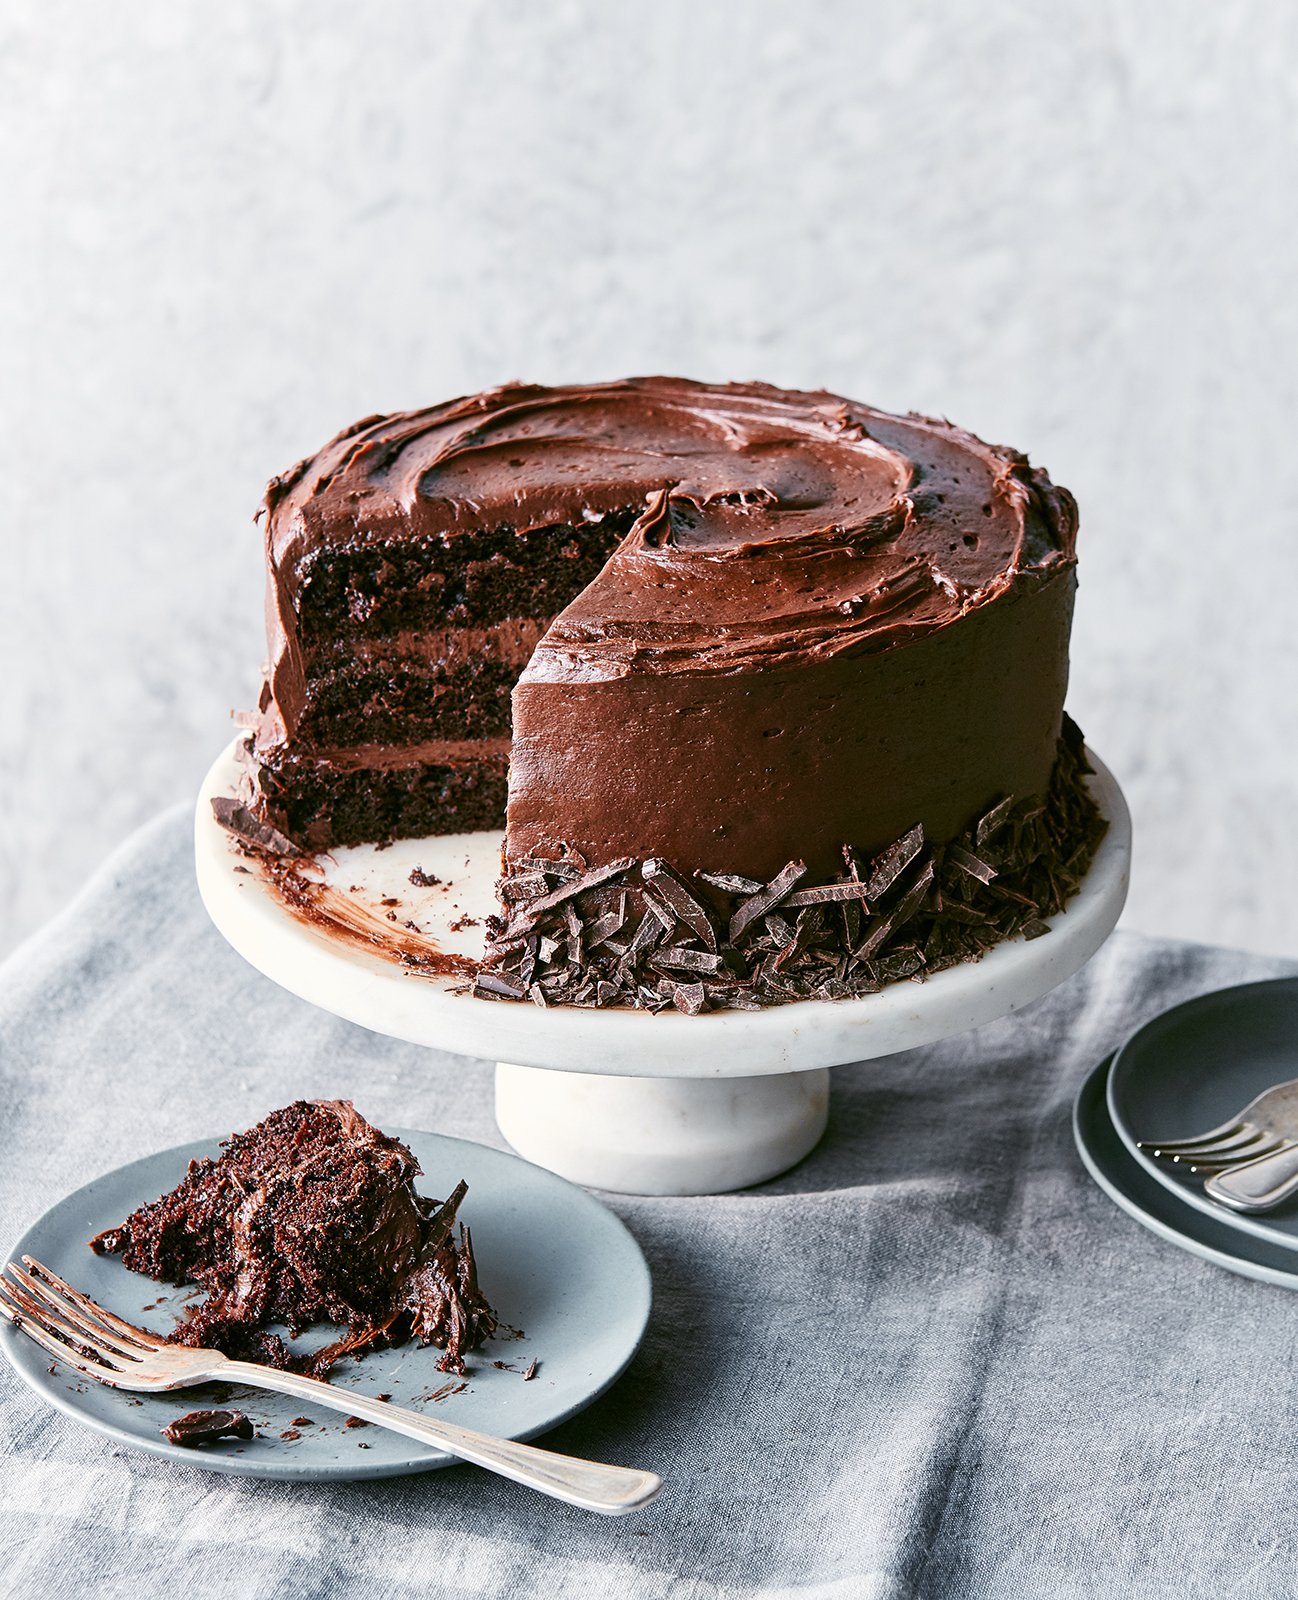 Colin Price's photo of Maria's triple layer chocolate cake with chocolate frosting on a stand with a slice cut from it